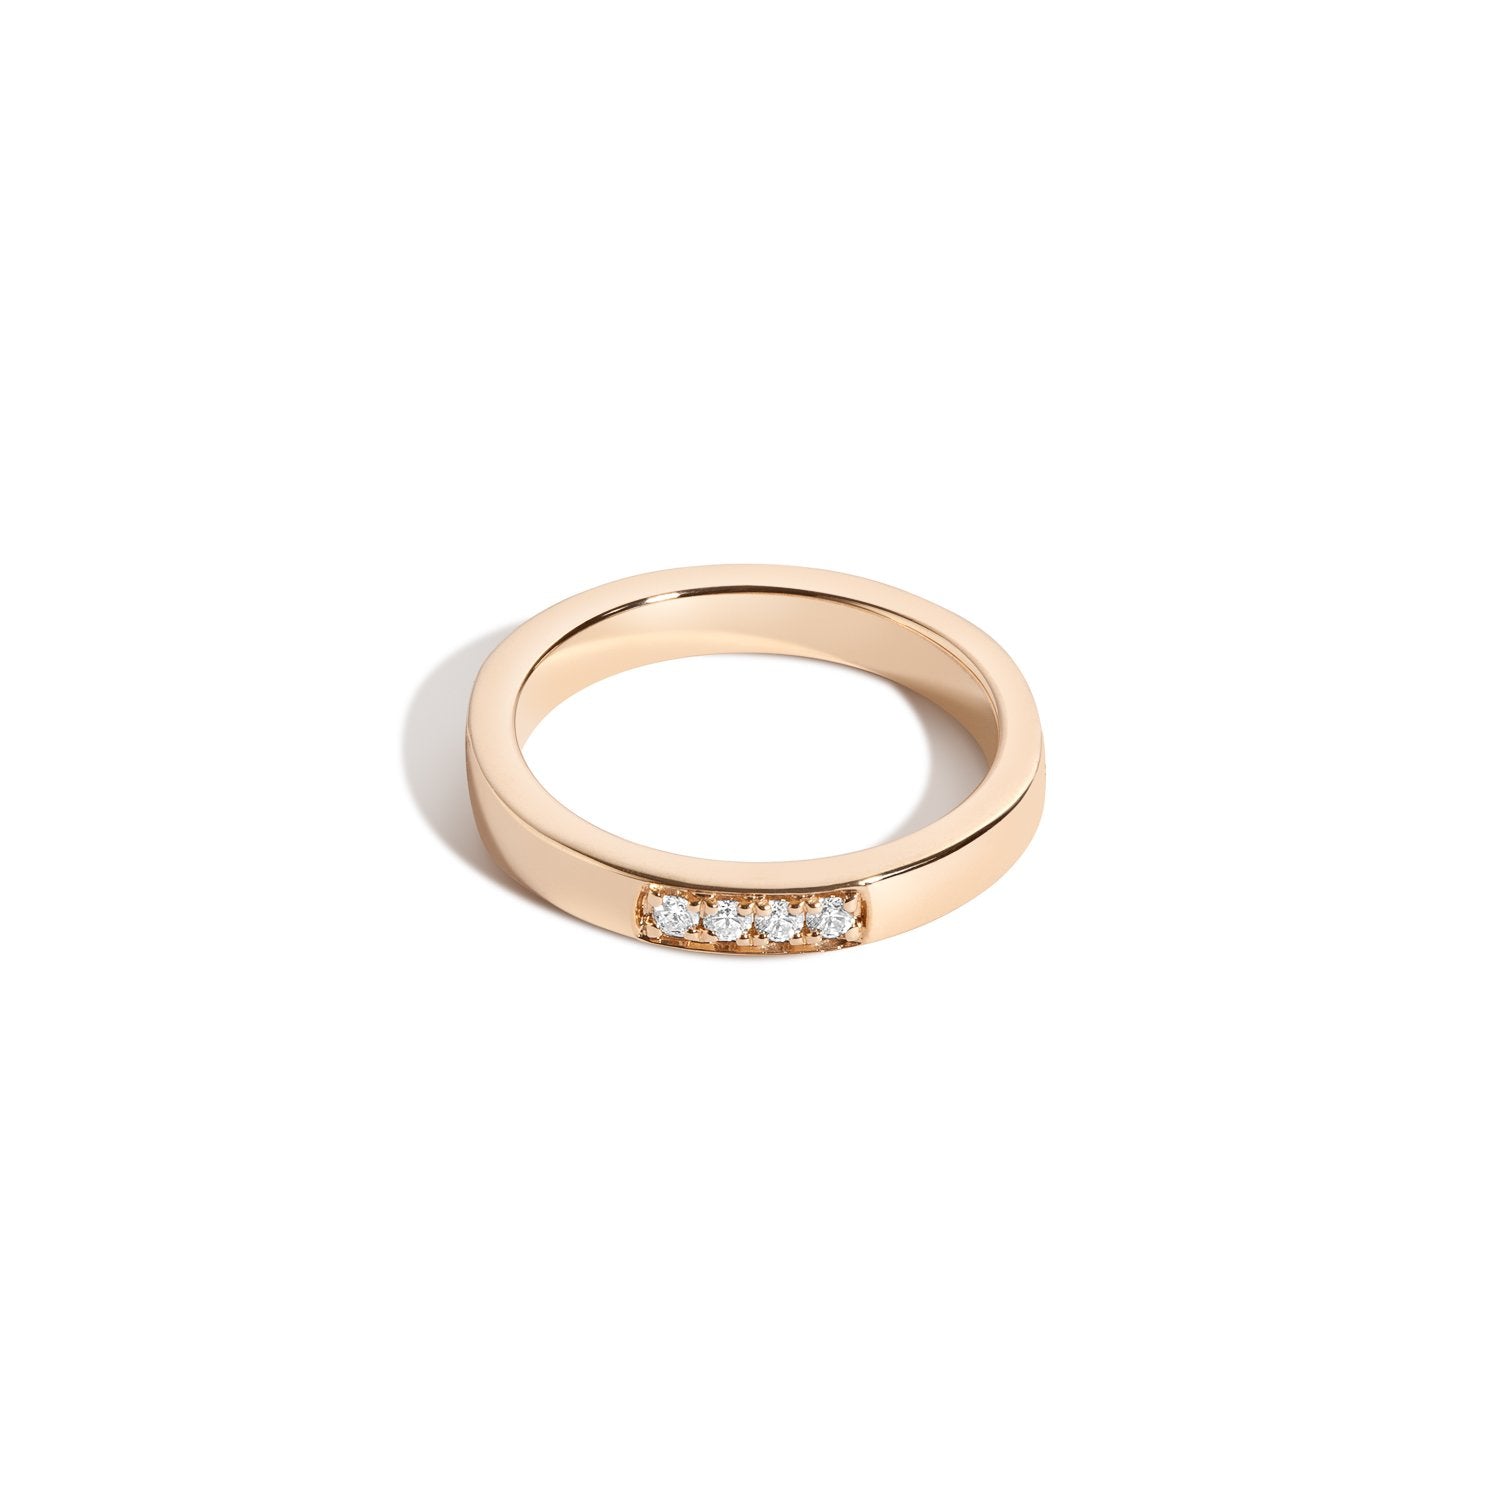 Shahla Karimi Jewelry Morse Code Series Ring 14K Yellow Gold - Letter "H"